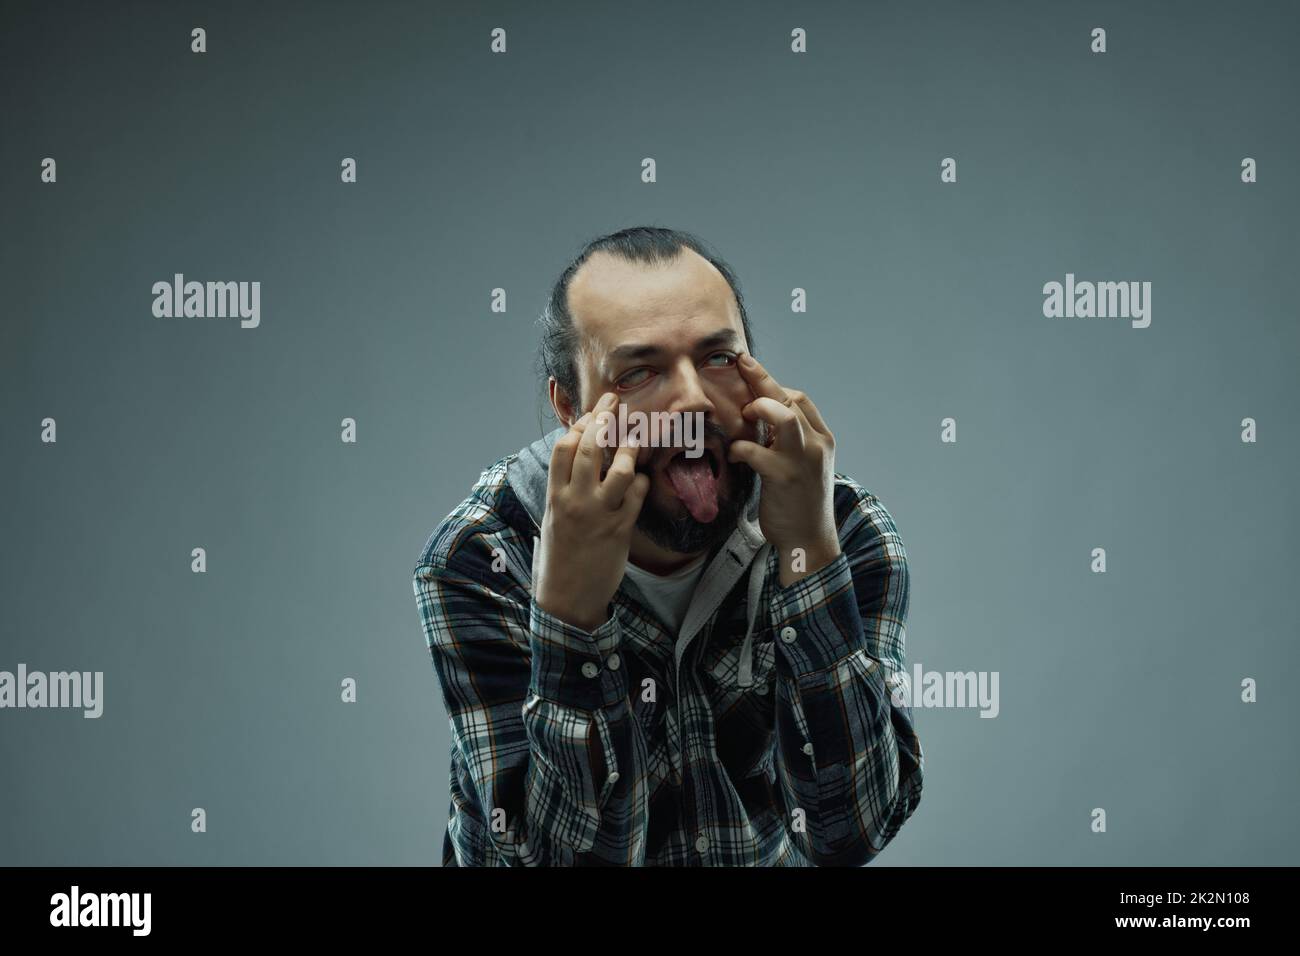 Imbecilic or manic man pulling a grotesque face at the camera Stock Photo